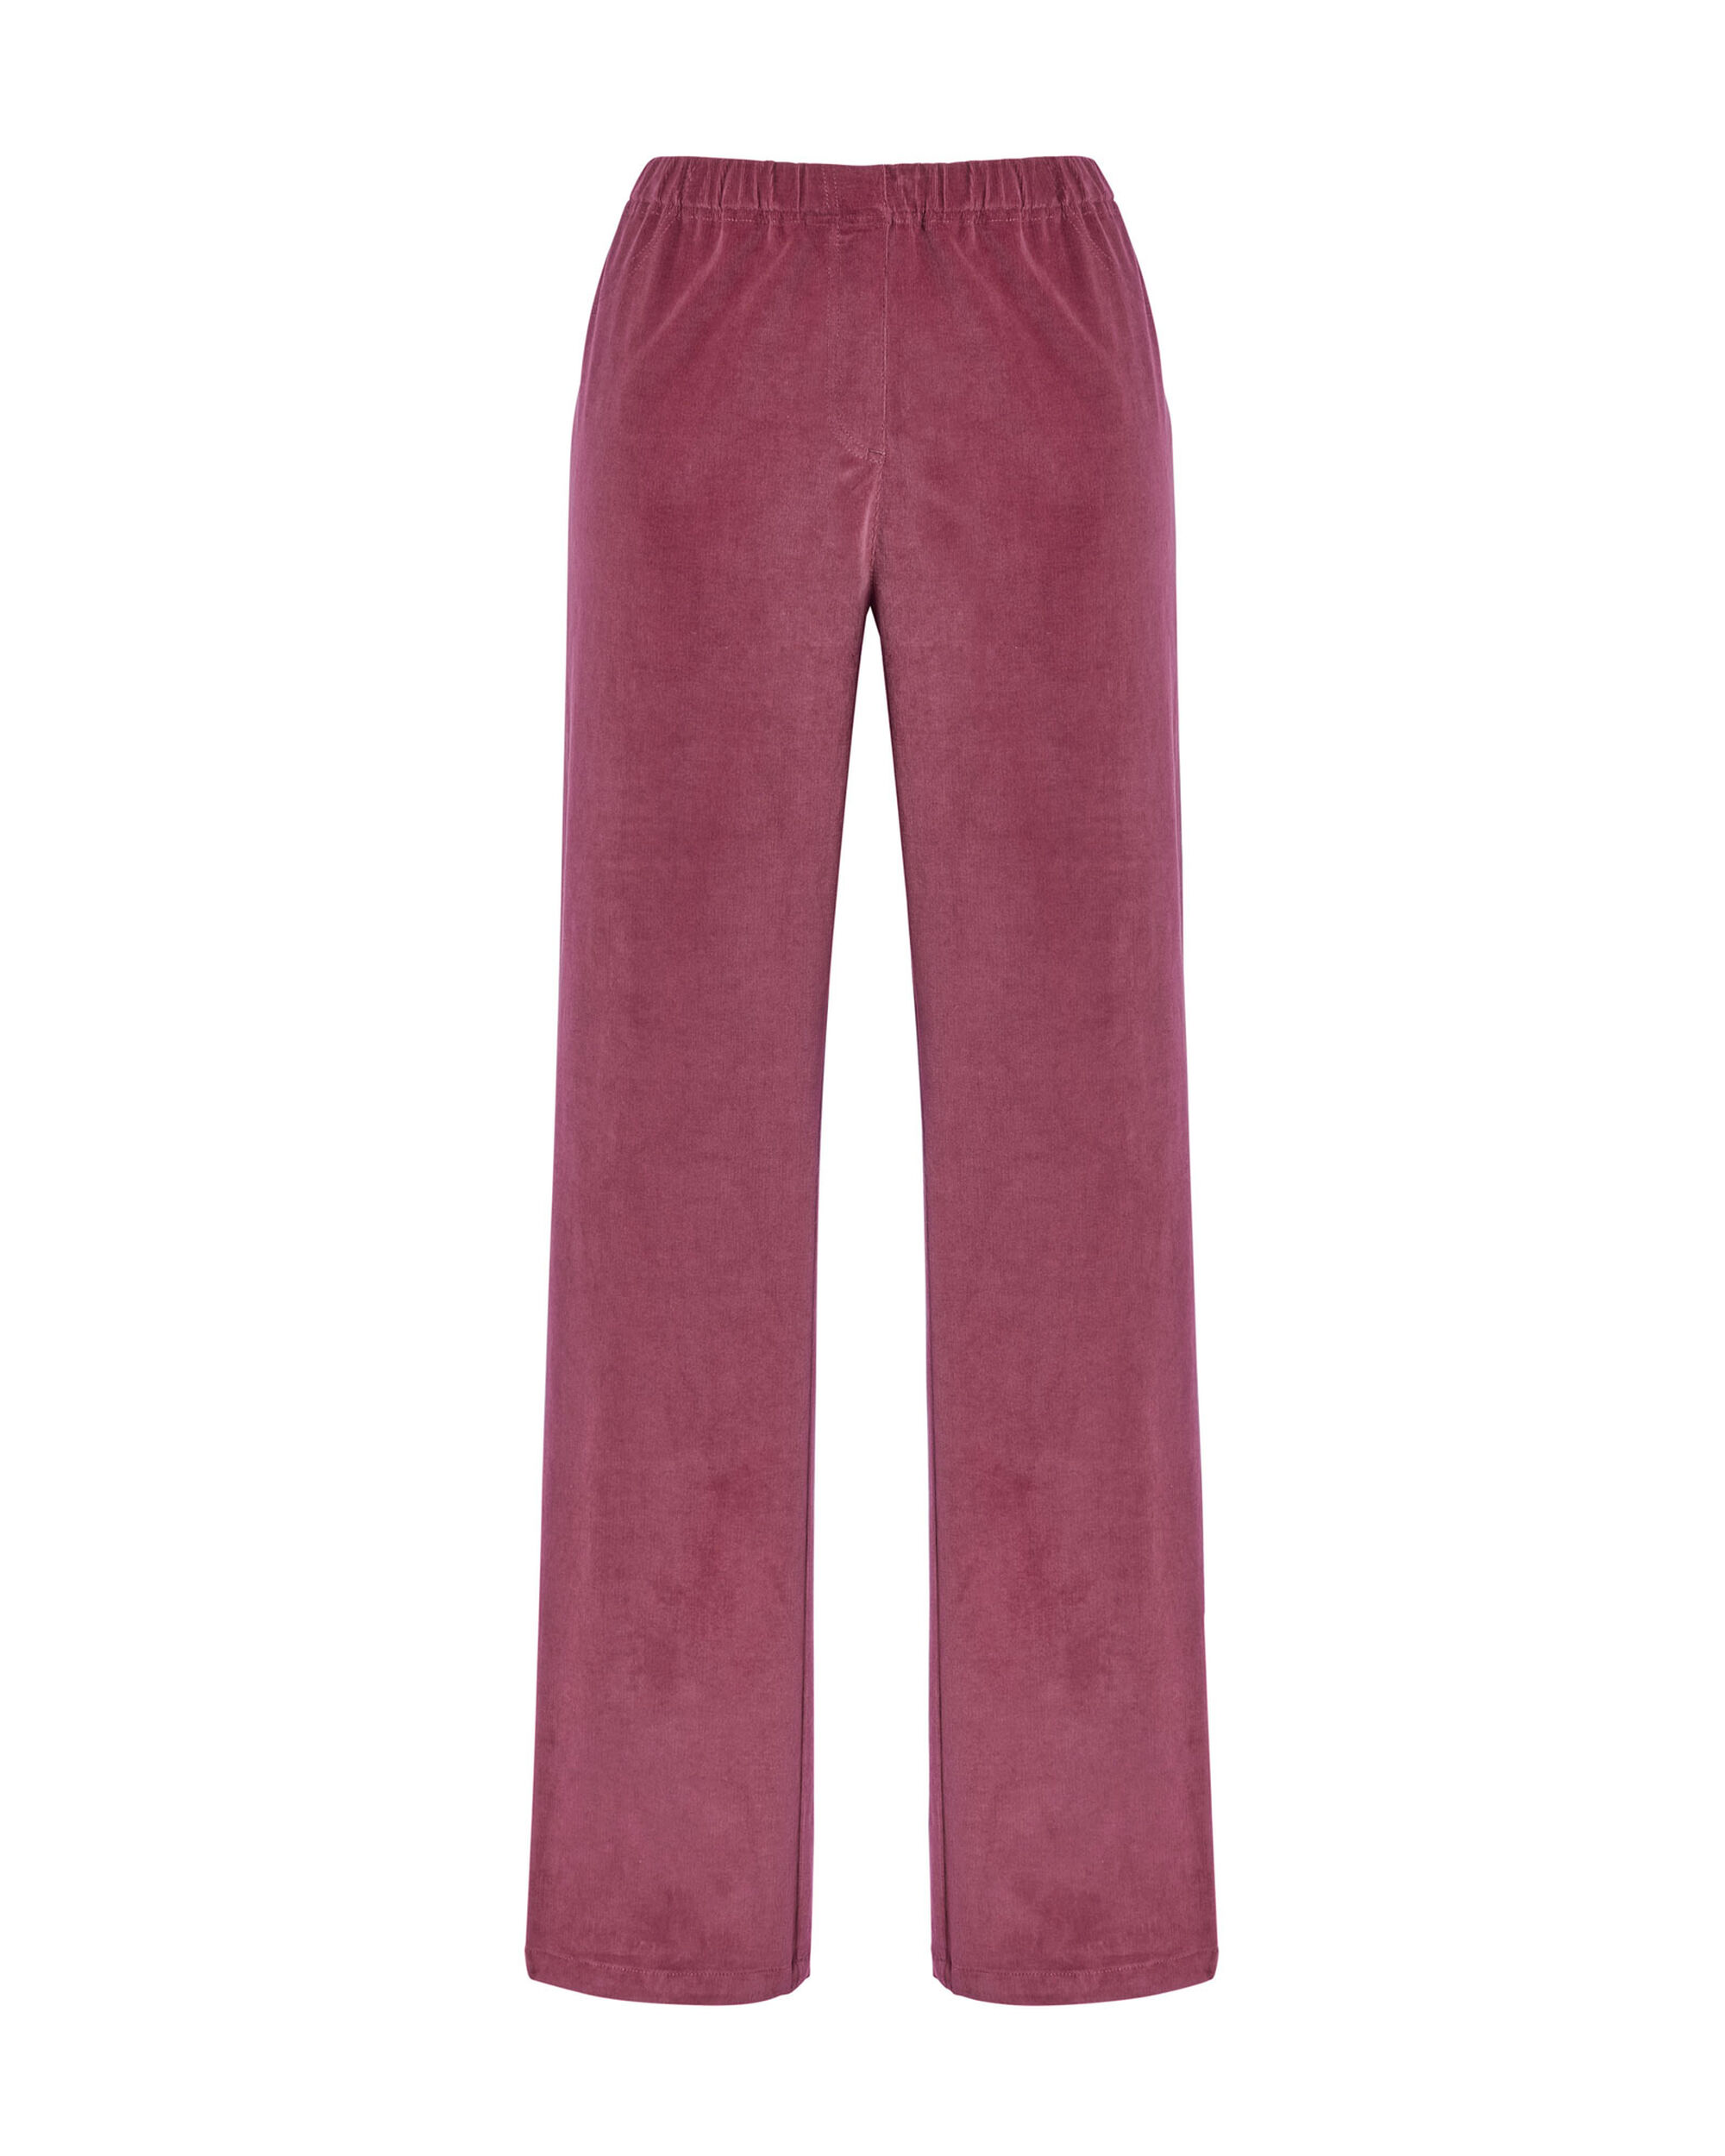 Pull-on Stretch Cord Pants